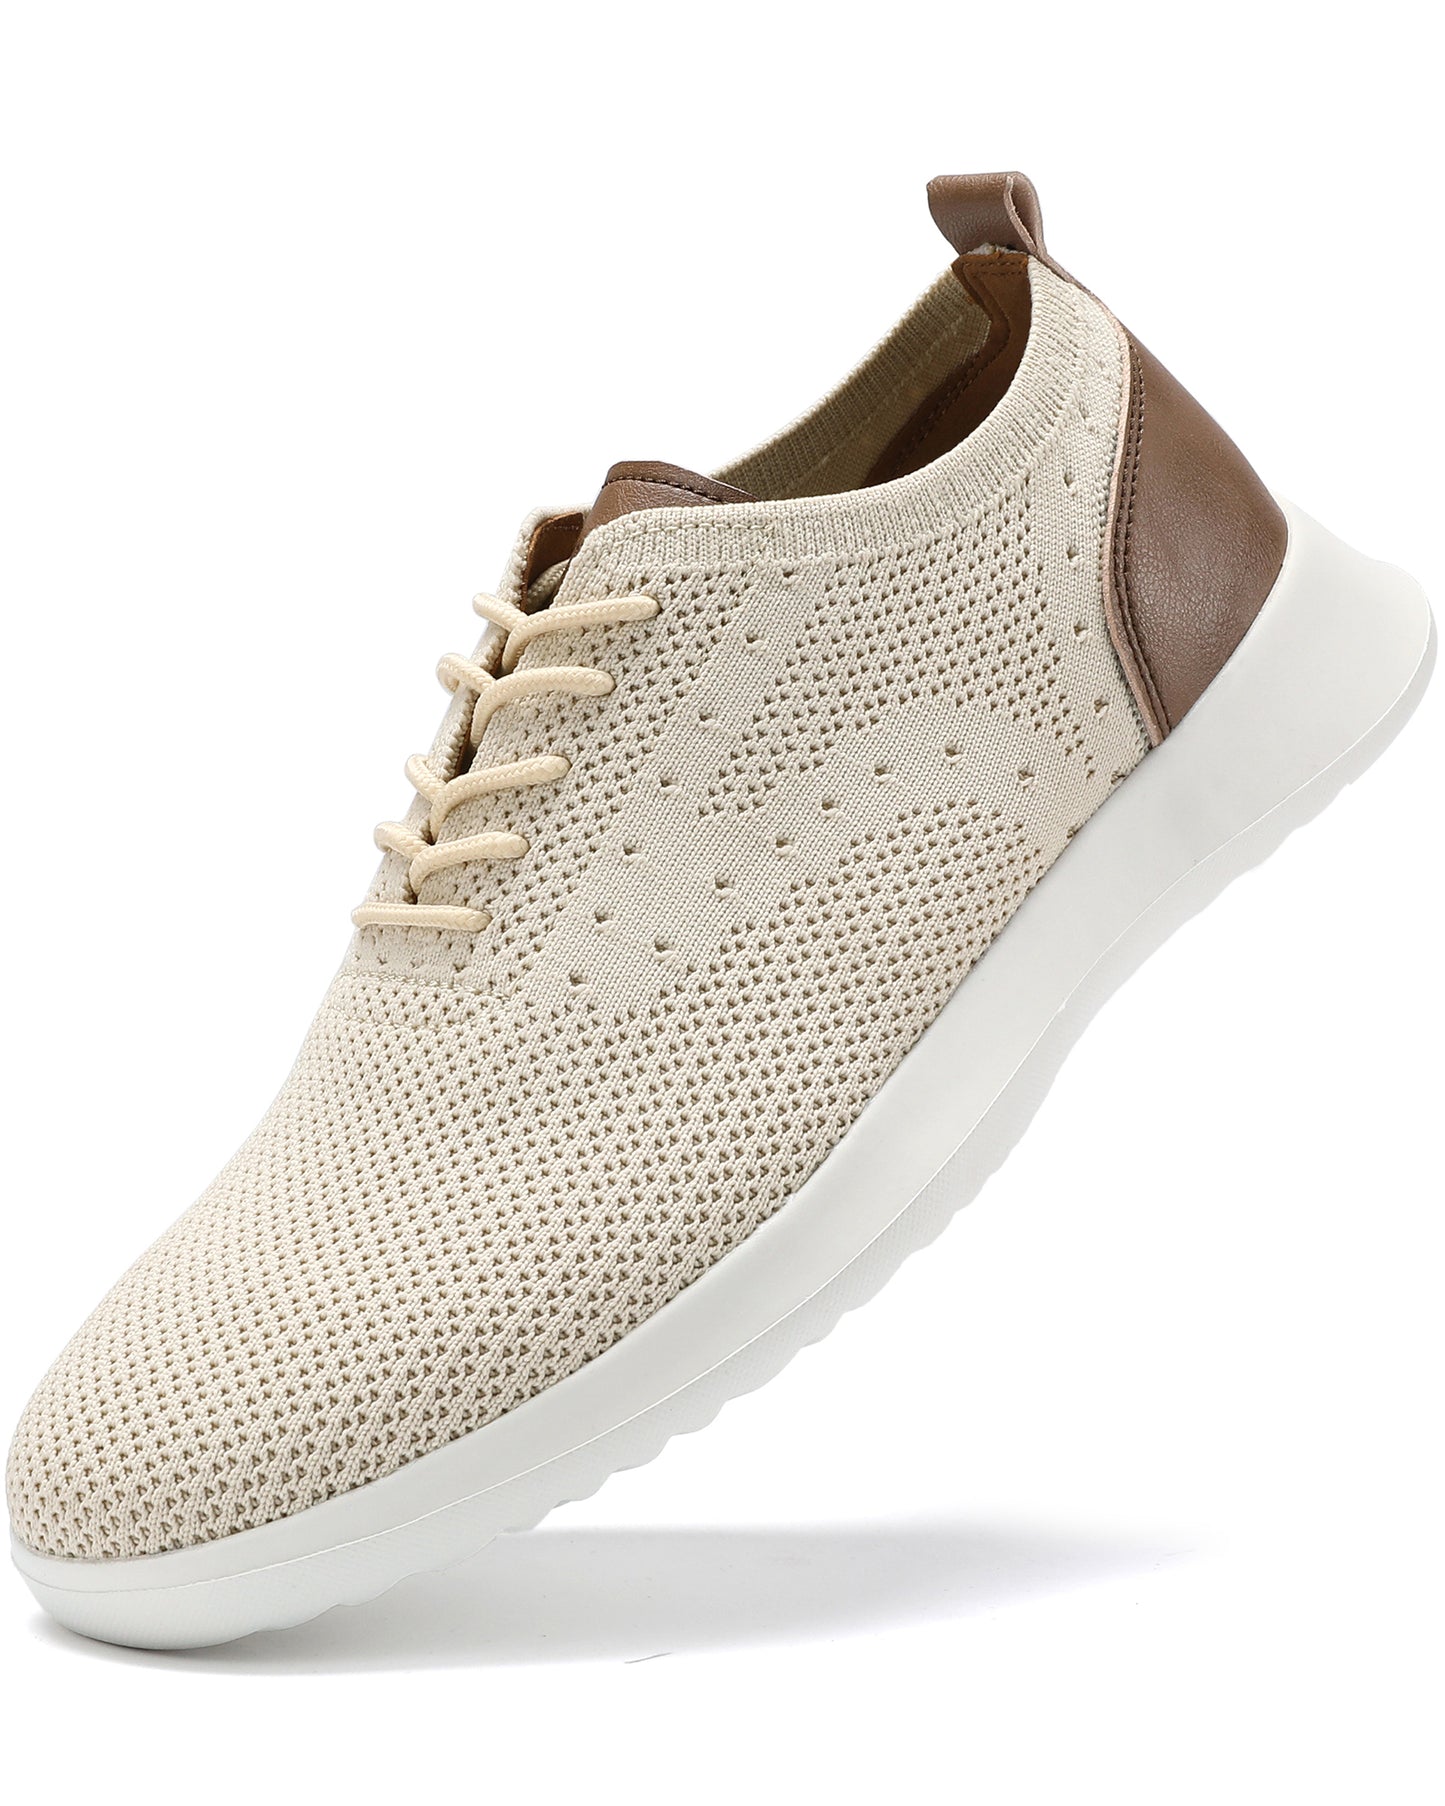 Men's Casual Dress Oxfords Shoes Knit Lightweight Breathable Fashion Sneaker